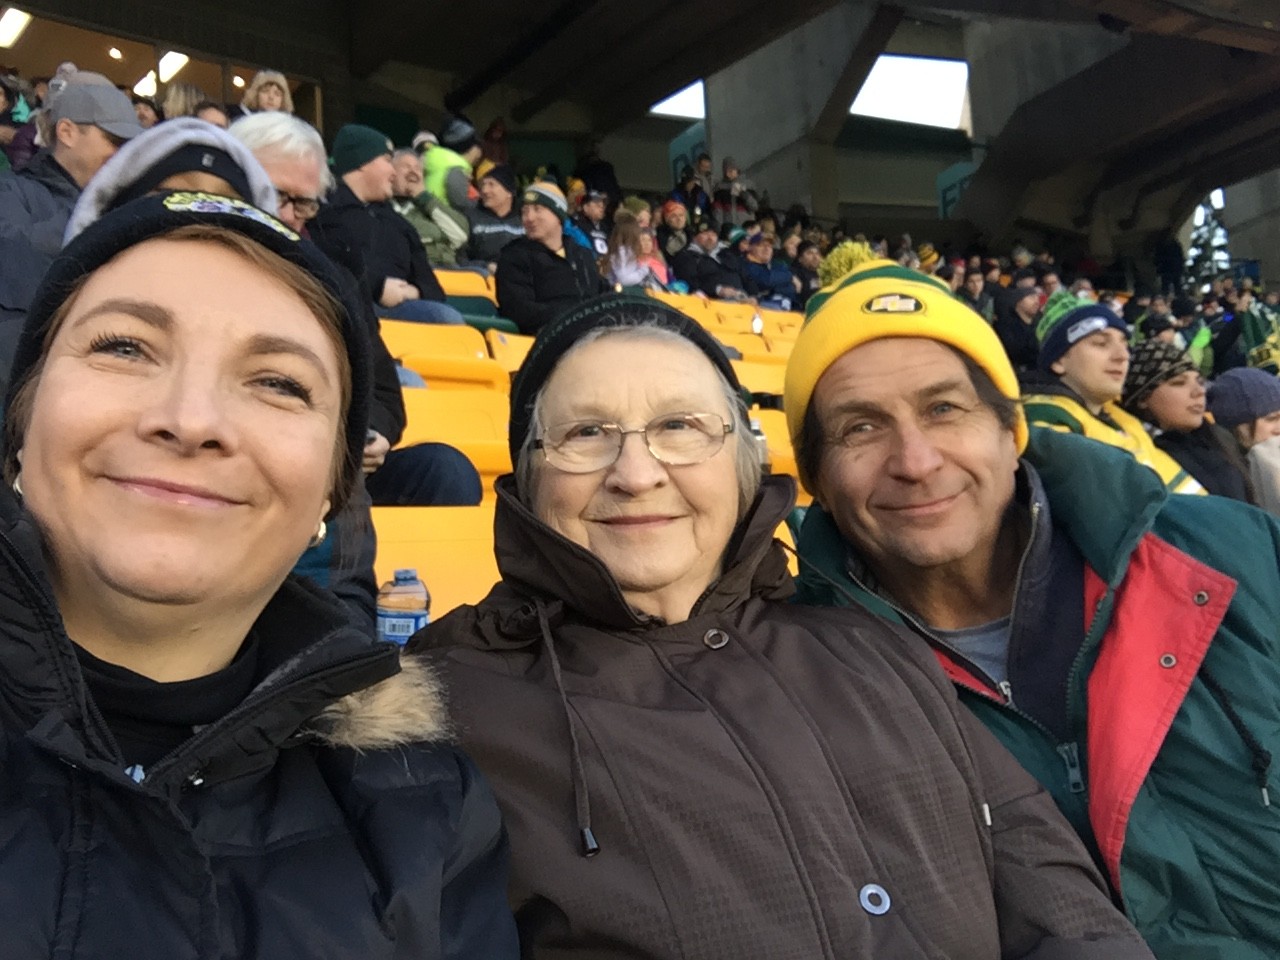 Vivian at a football game with her family